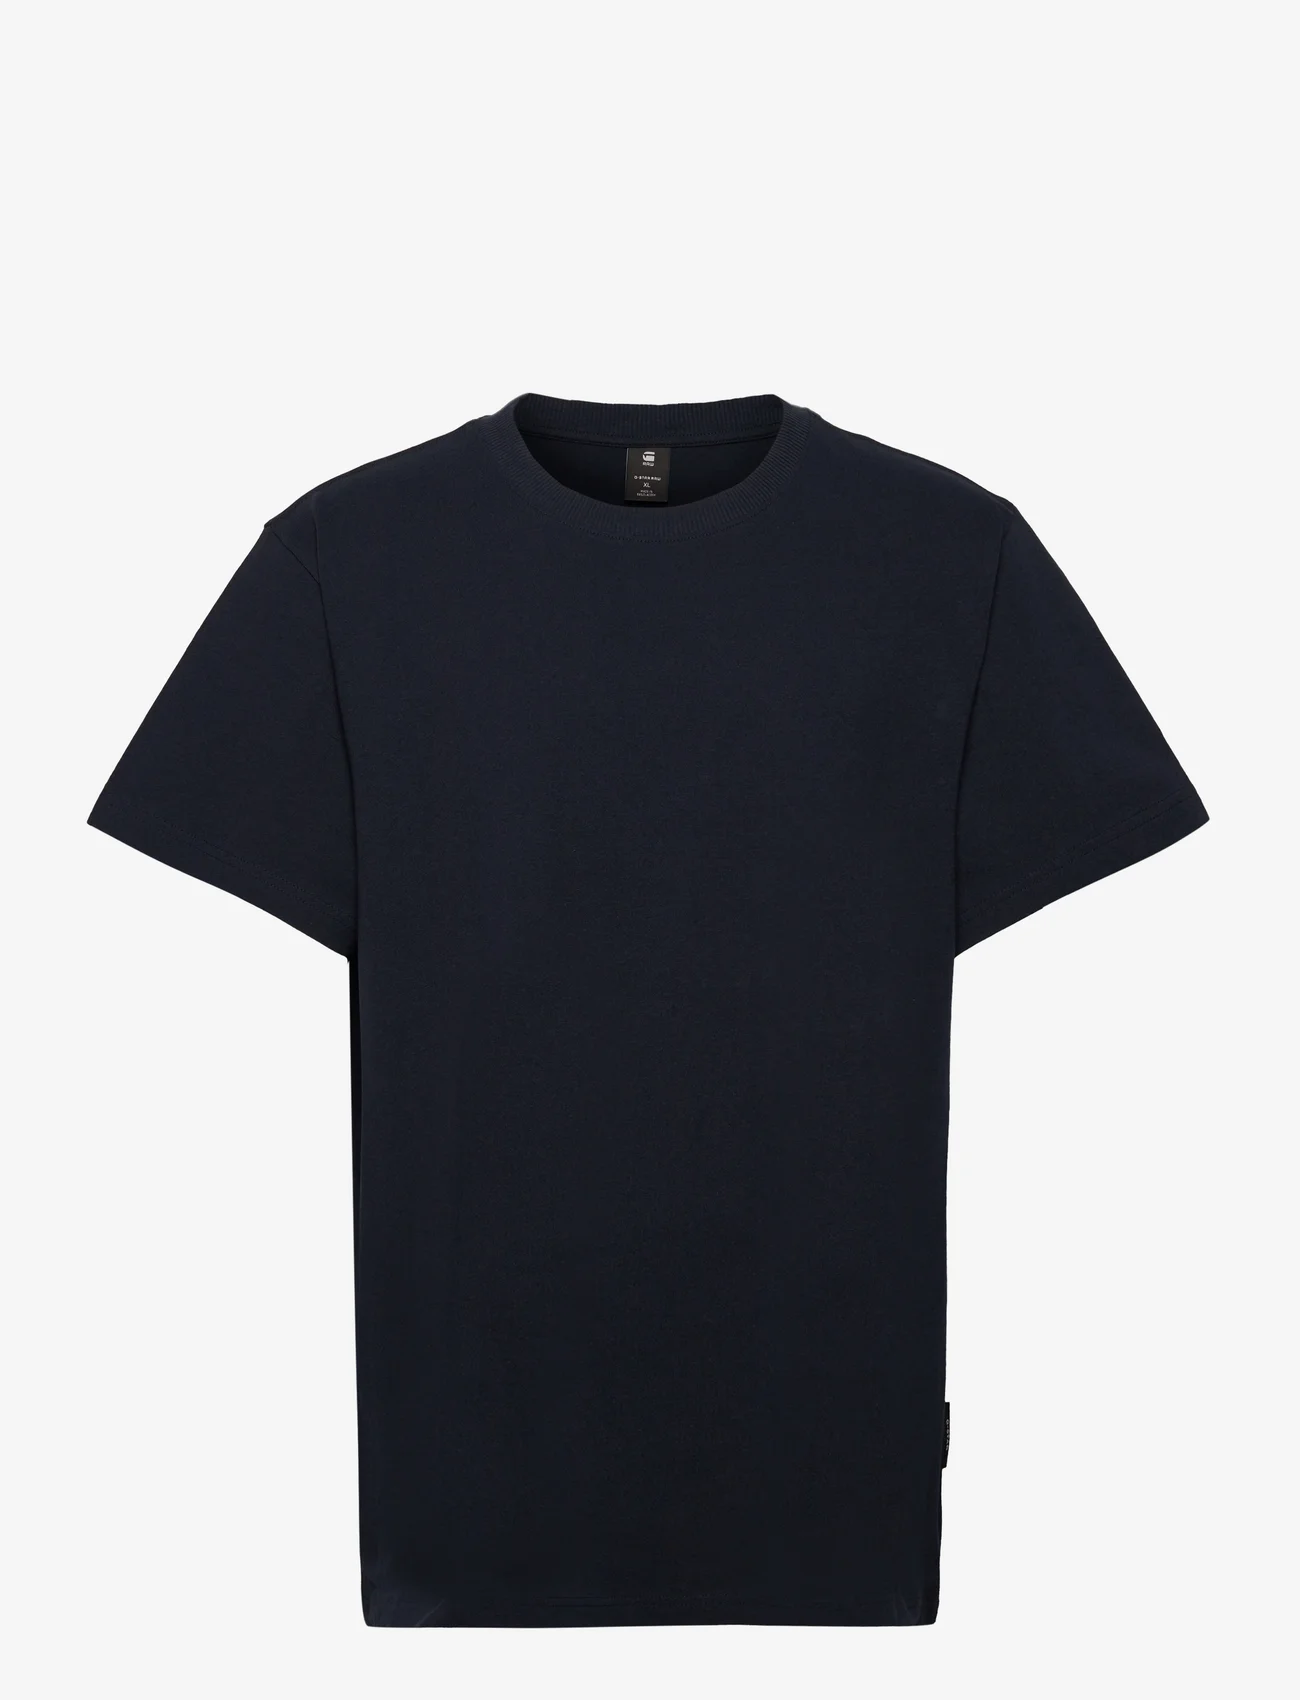 G-Star RAW - Loose r t s\s - lowest prices - salute - 0